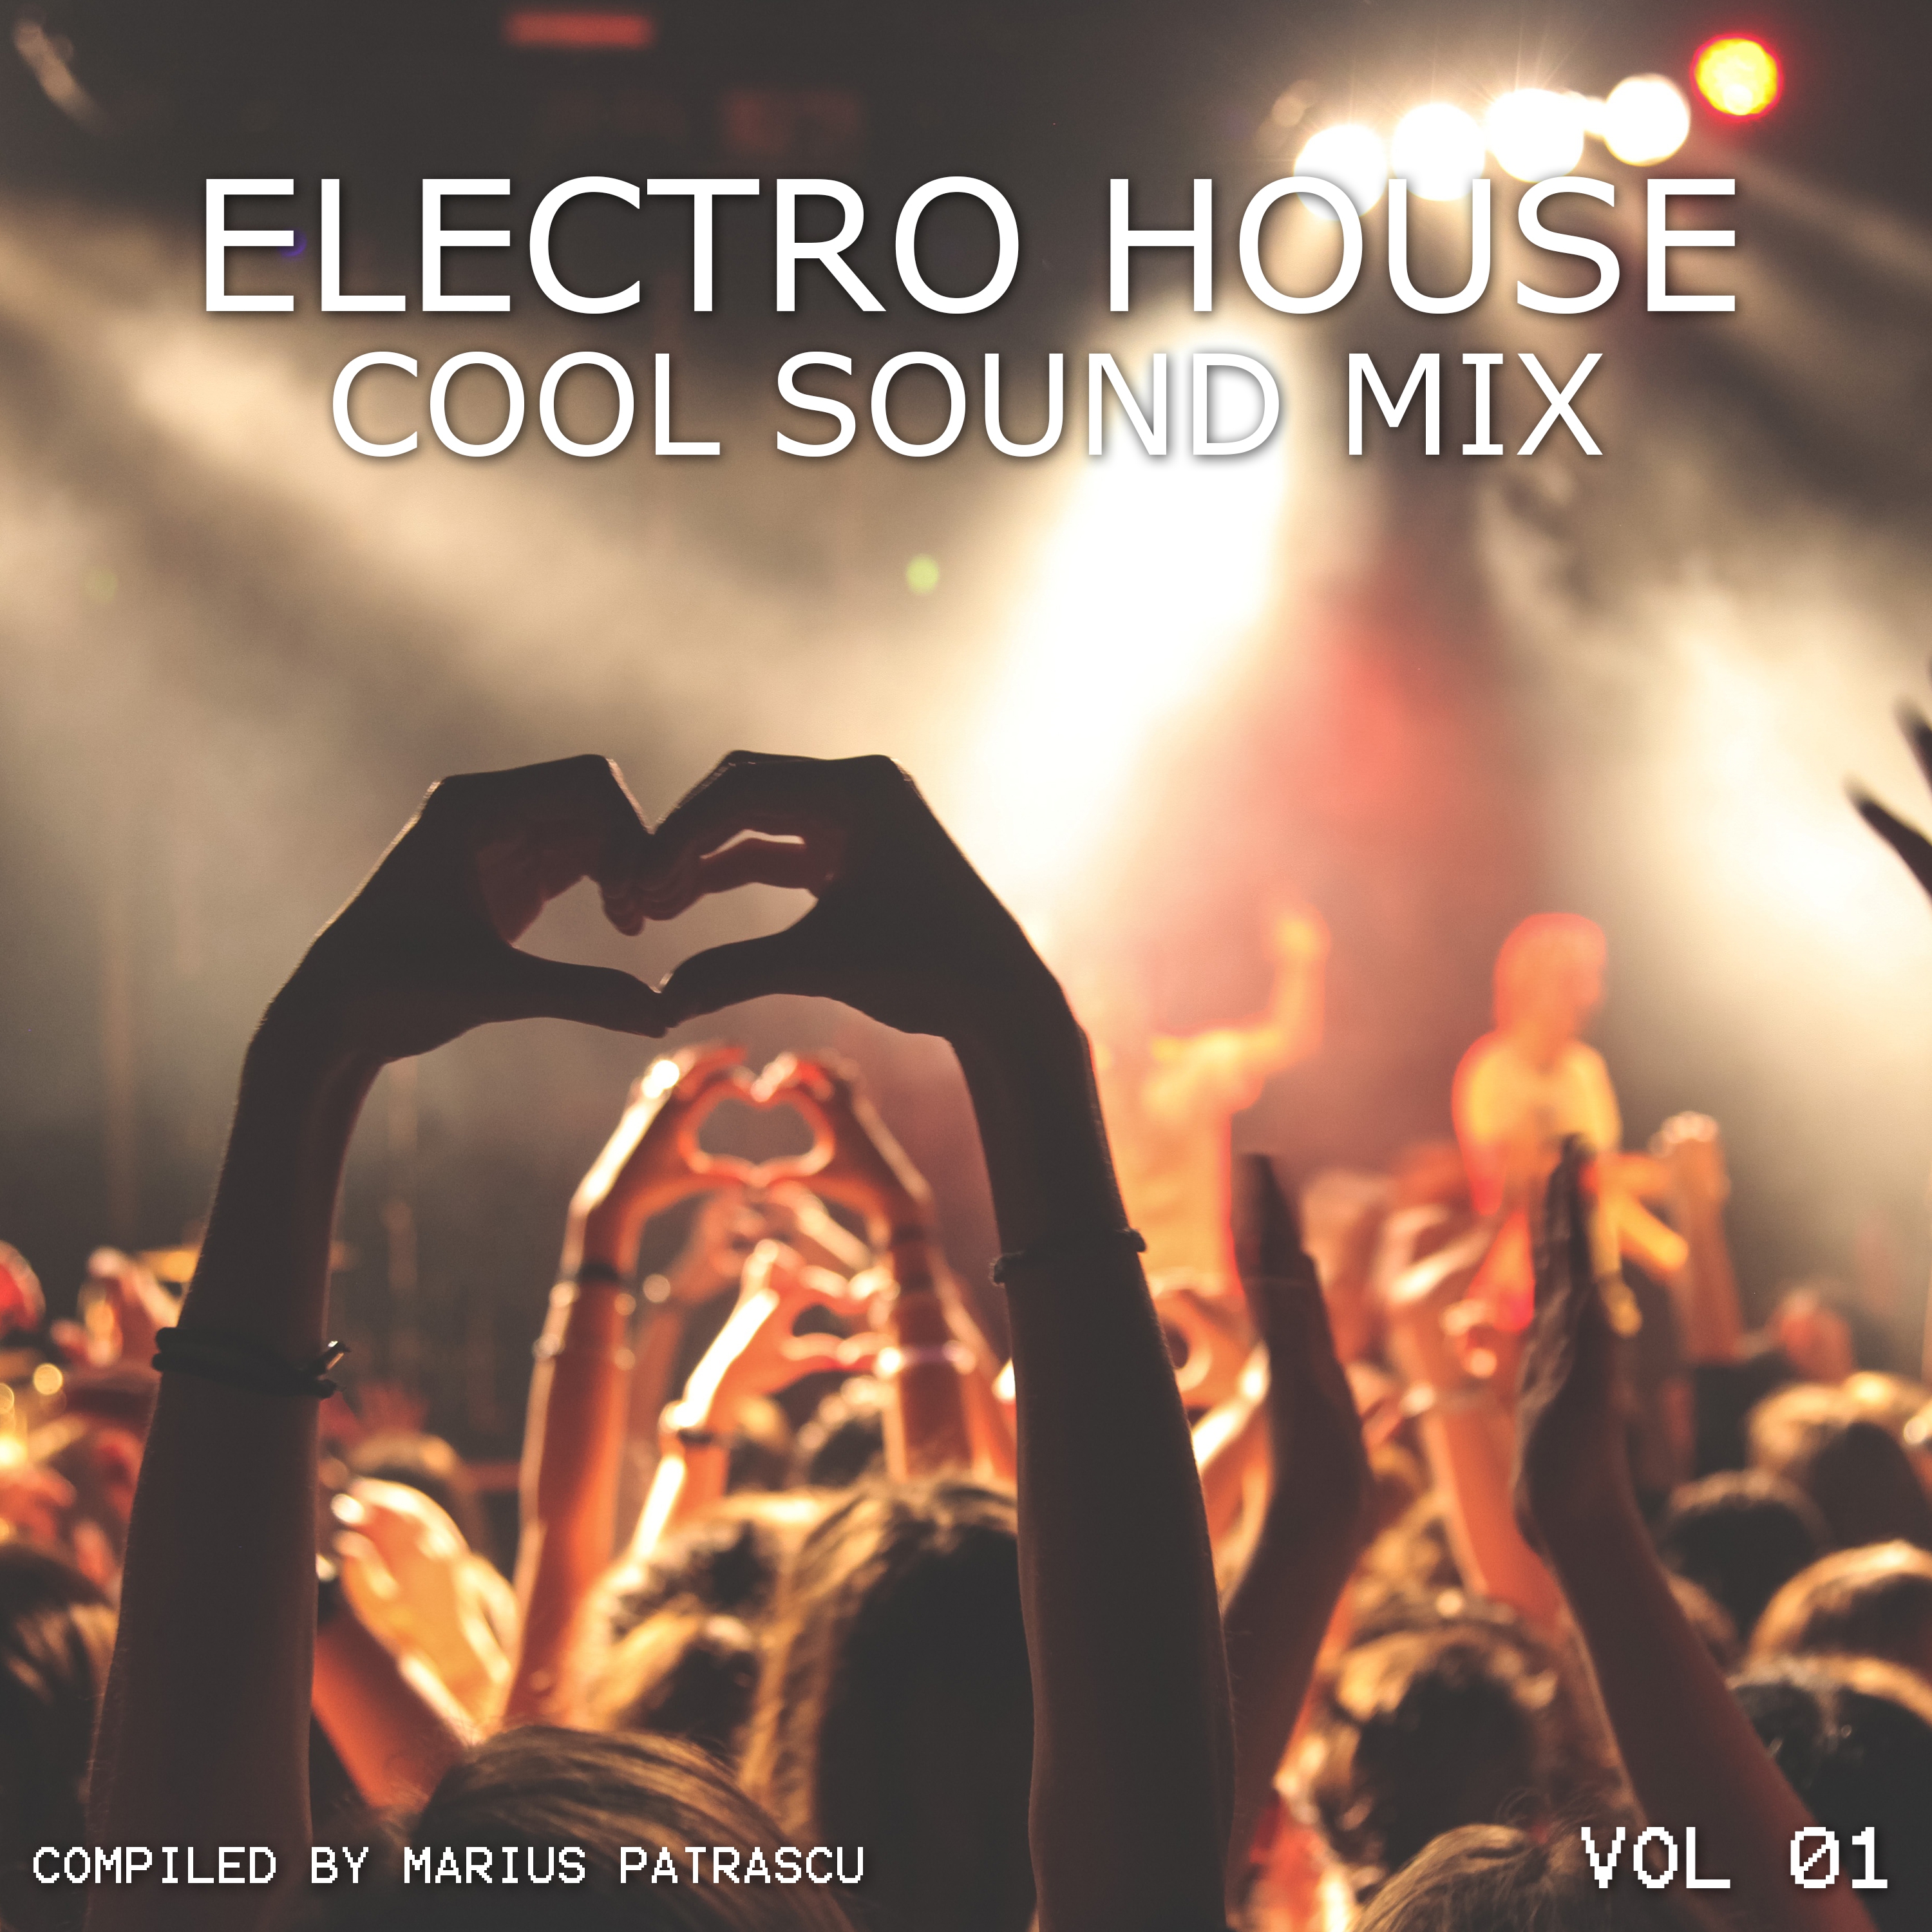 Who'll Save You (Slin Project & Houseboy Electro Mix) [Feat. Nati Gale]